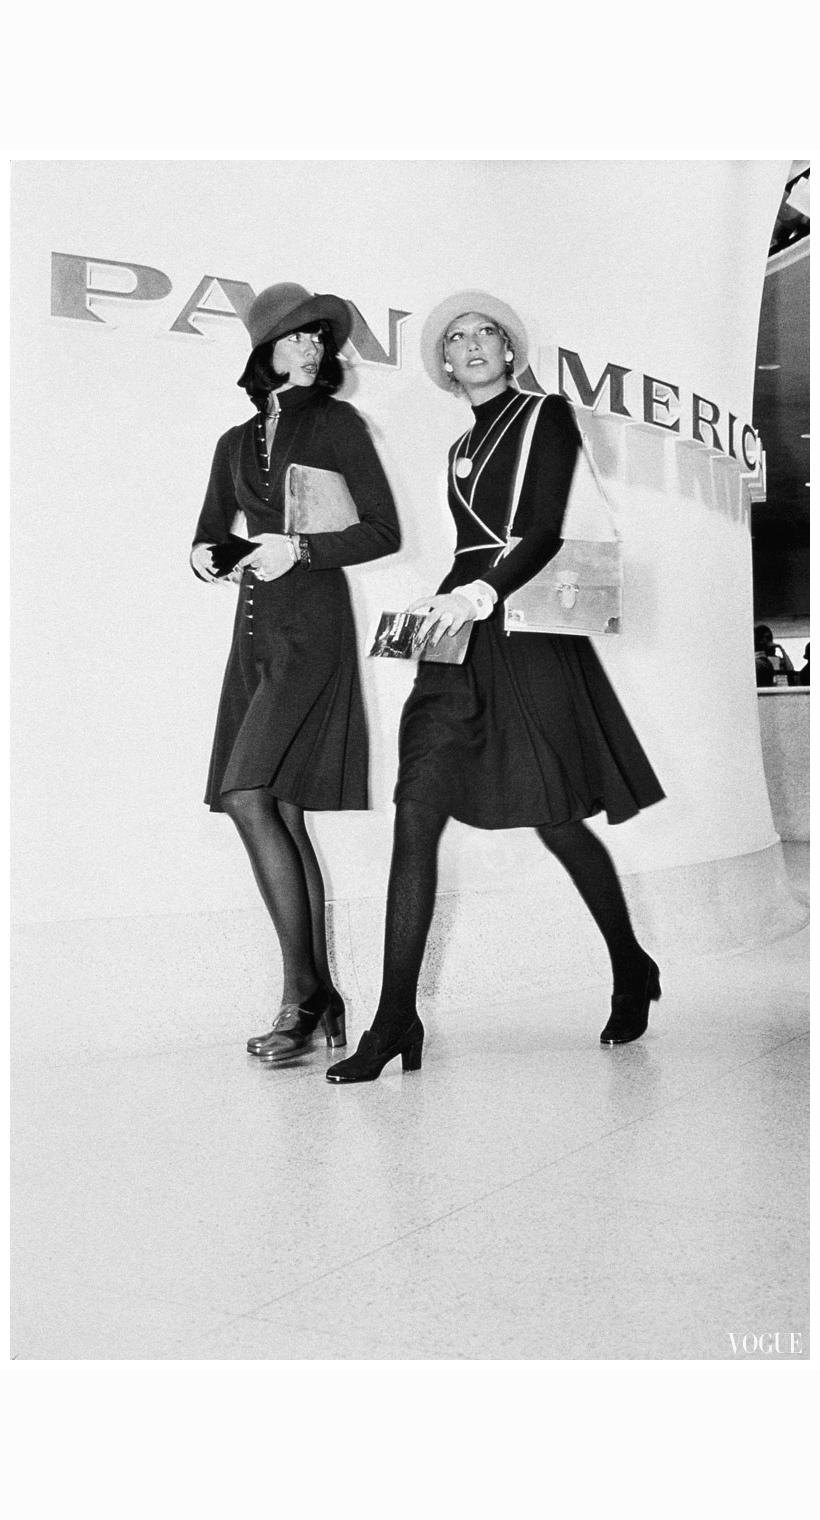 kourken-pakchanian-models-walking-in-front-of-a-pan-american-airlines-sign-at-left-wearing-a-wool-jersey-knit-wrap-dress-by-rodriguez-and-at-right-wearing-a-knit-dress-with-piping-an